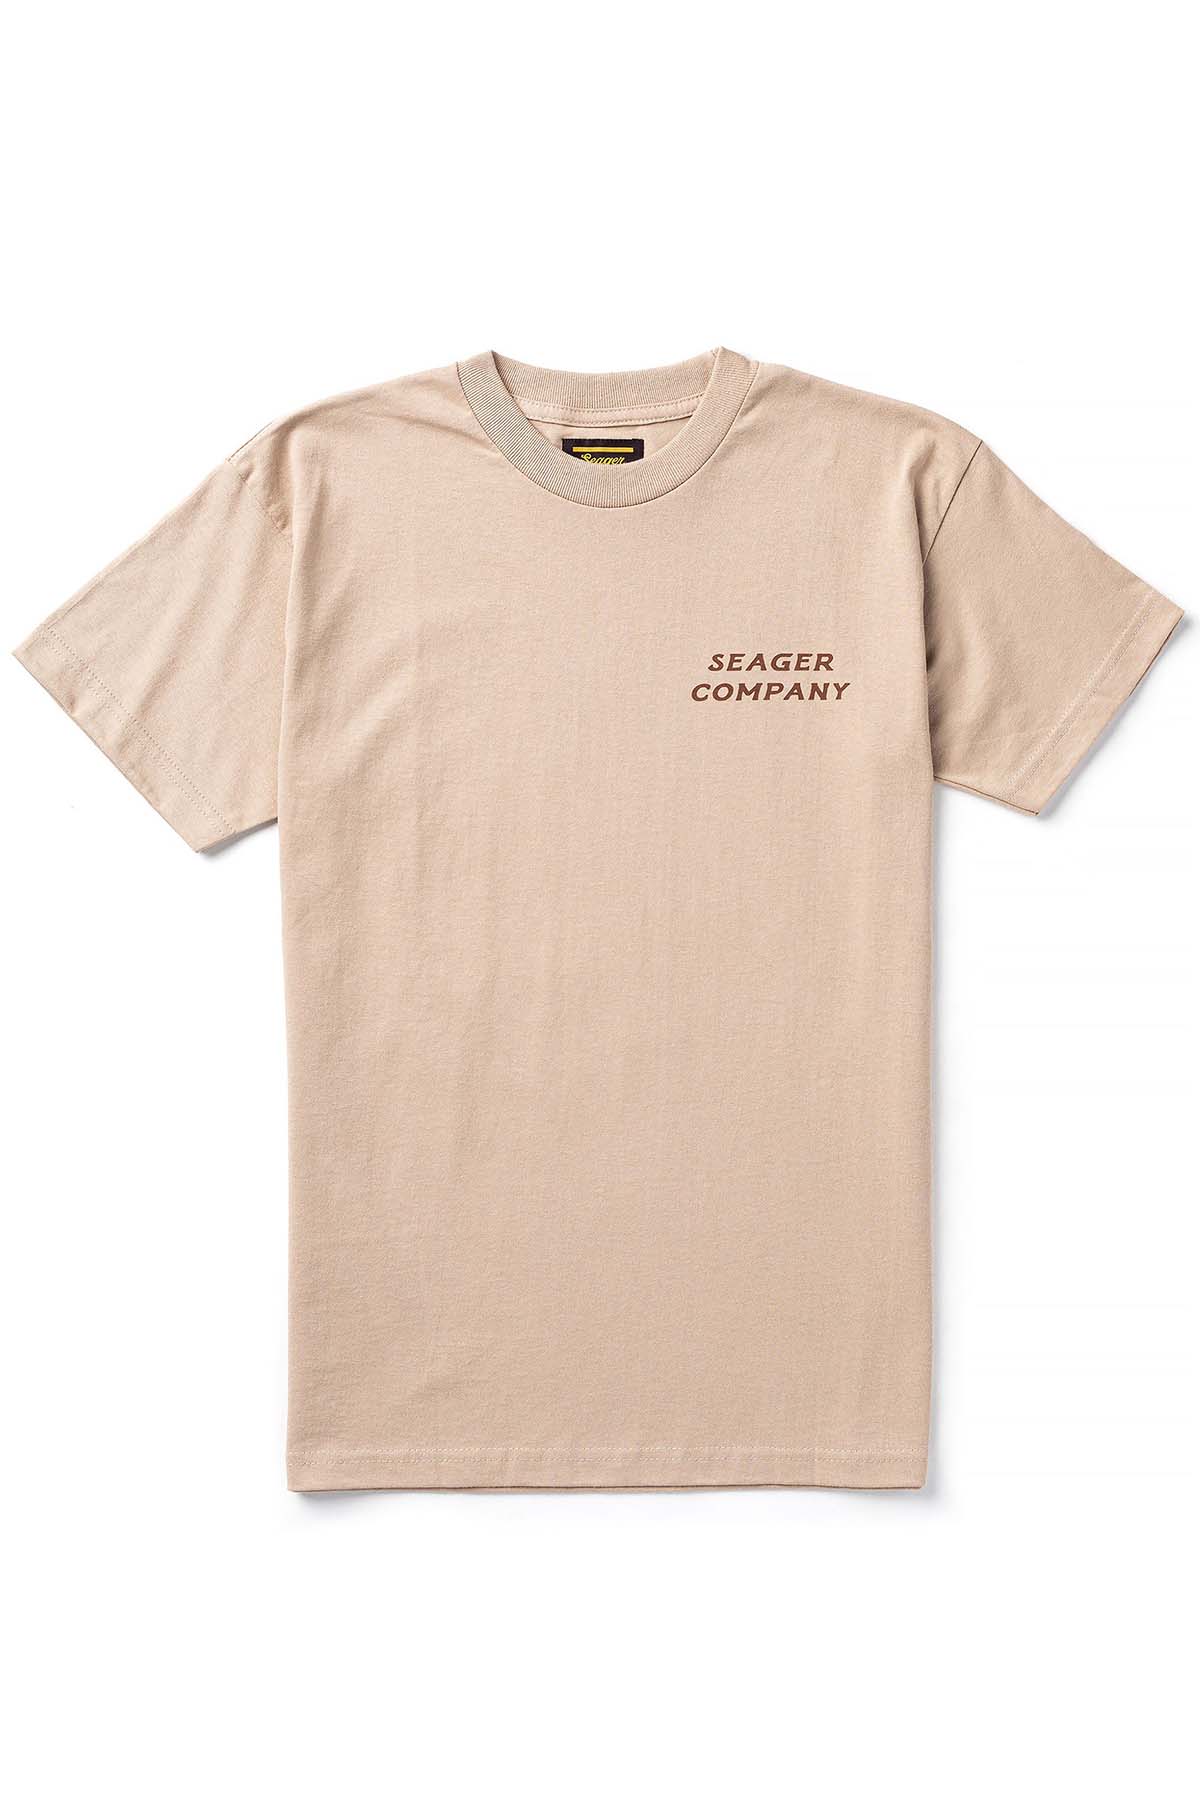 Seager - Down Home Tee - Cream - Front